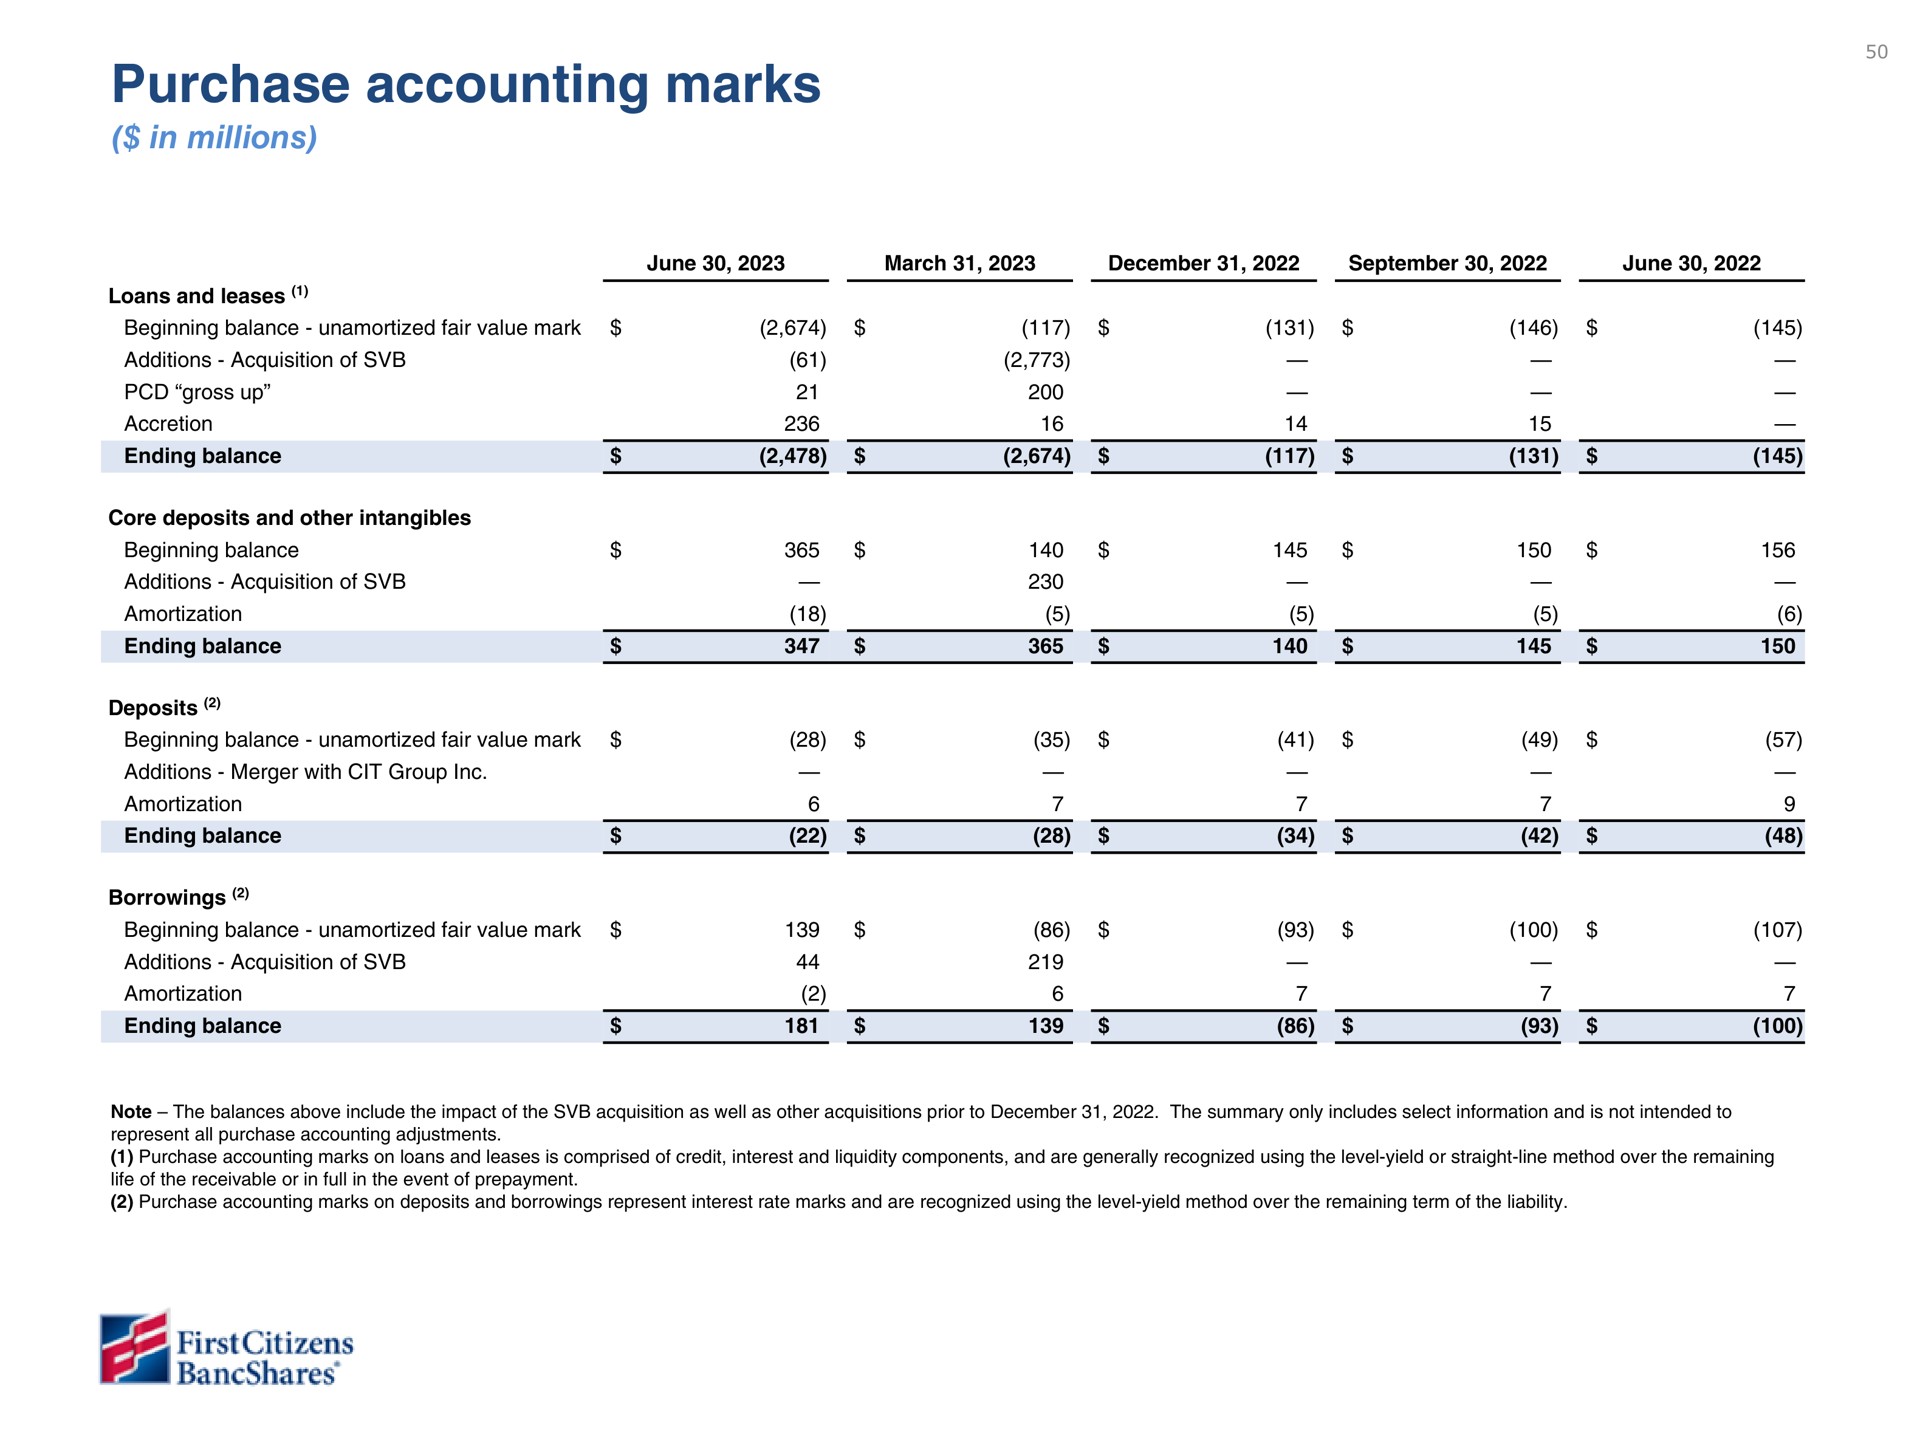 purchase accounting marks | First Citizens BancShares